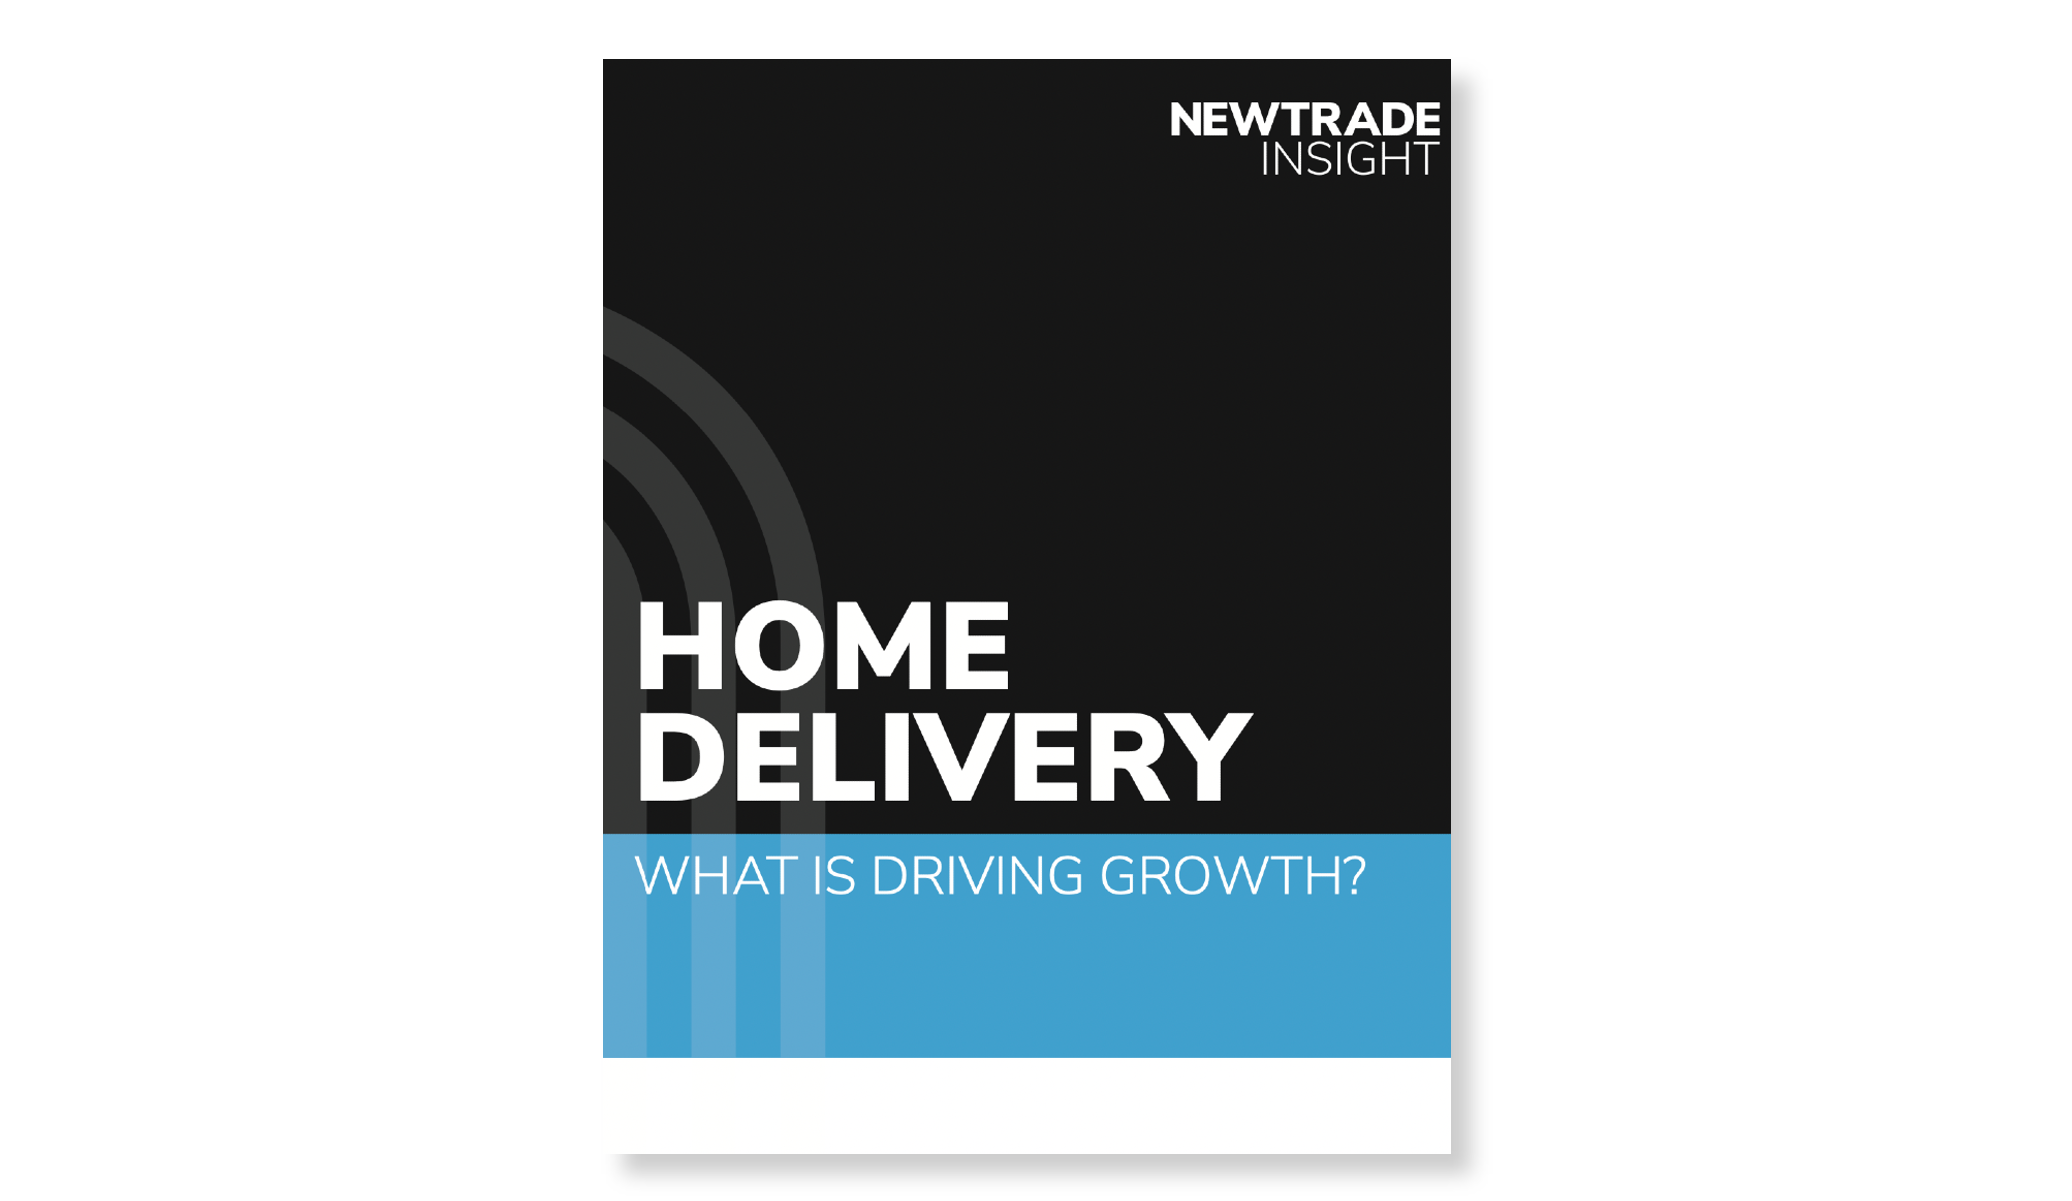 Newtrade Insight Report: Home Delivery